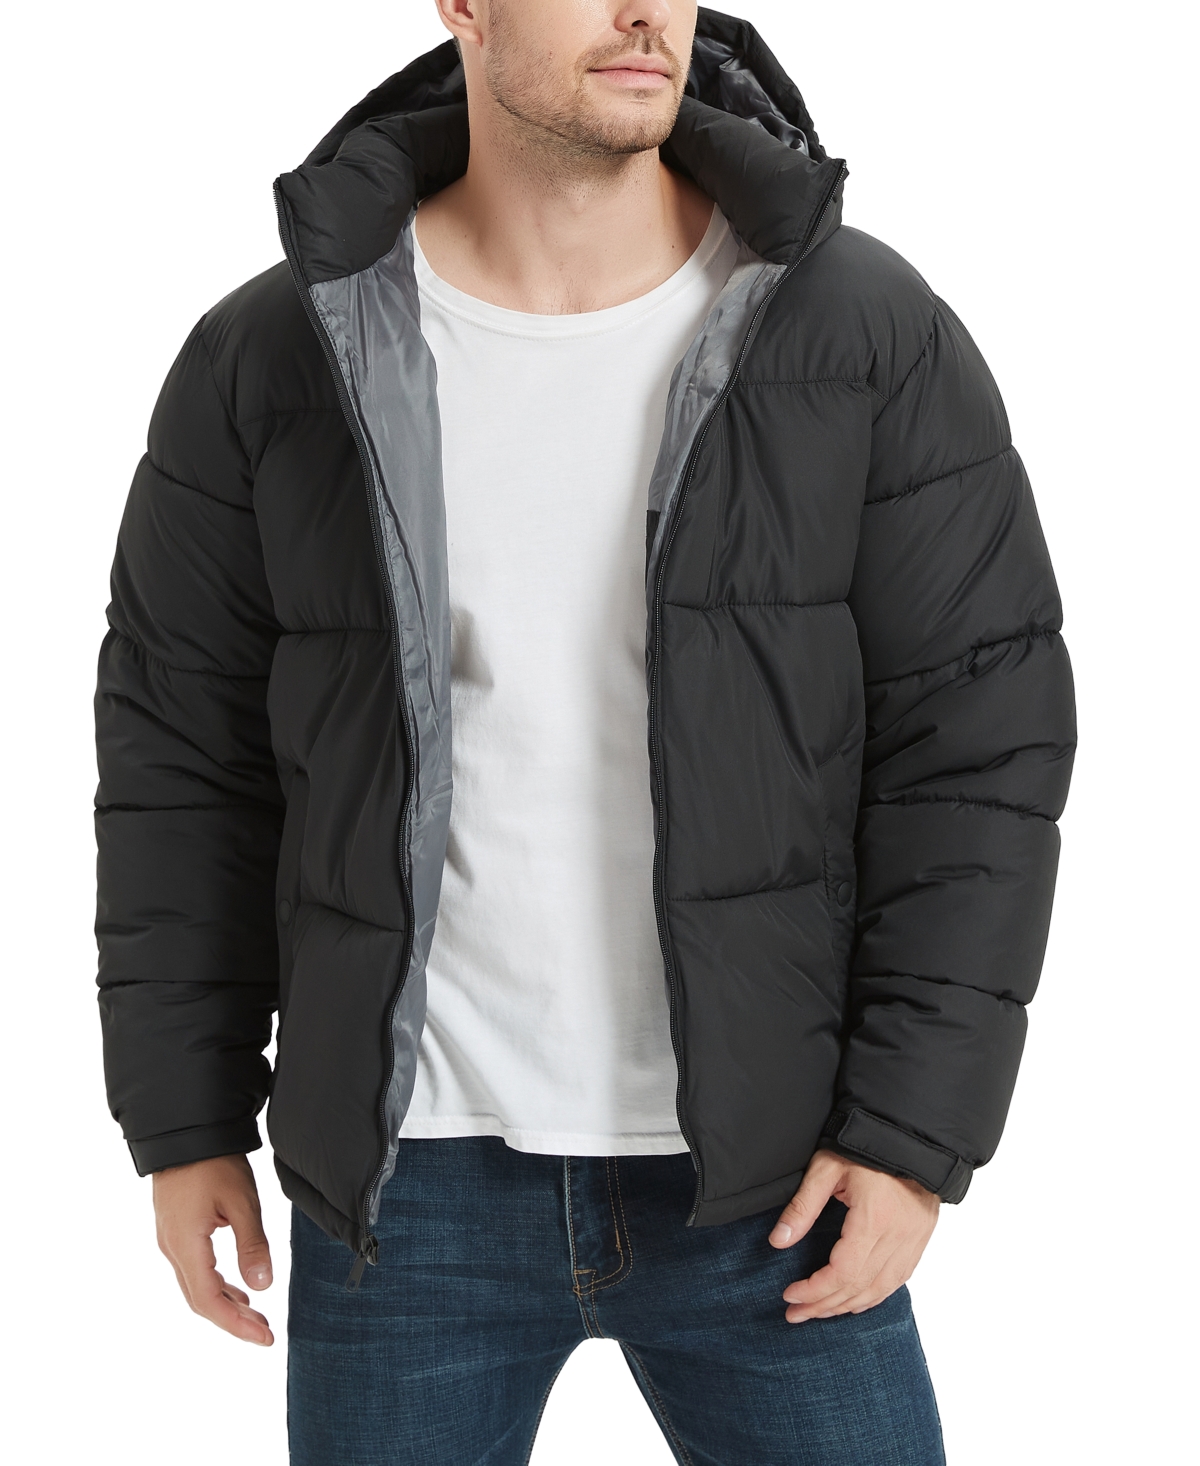 Men's Quilted Zip Front Hooded Puffer Jacket - Carbon